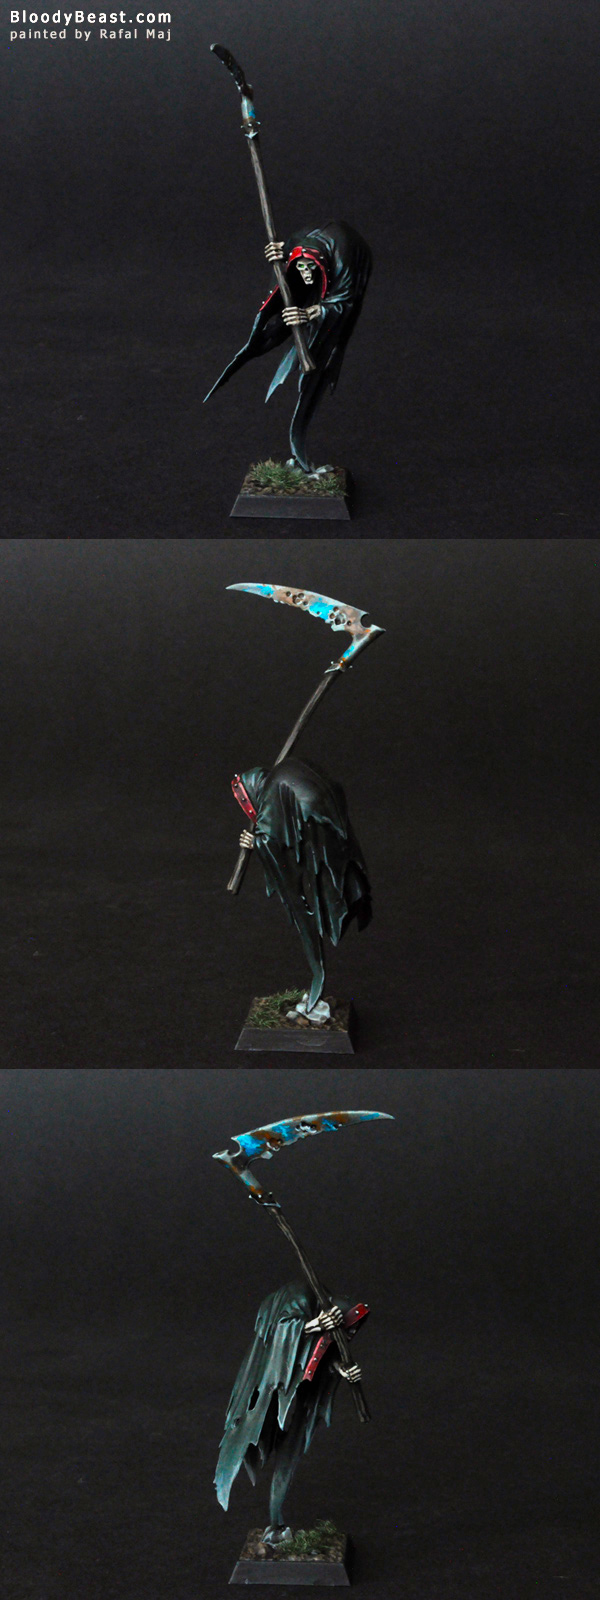 Vampire Counts Cairn Wraith painted by Rafal Maj (BloodyBeast.com)